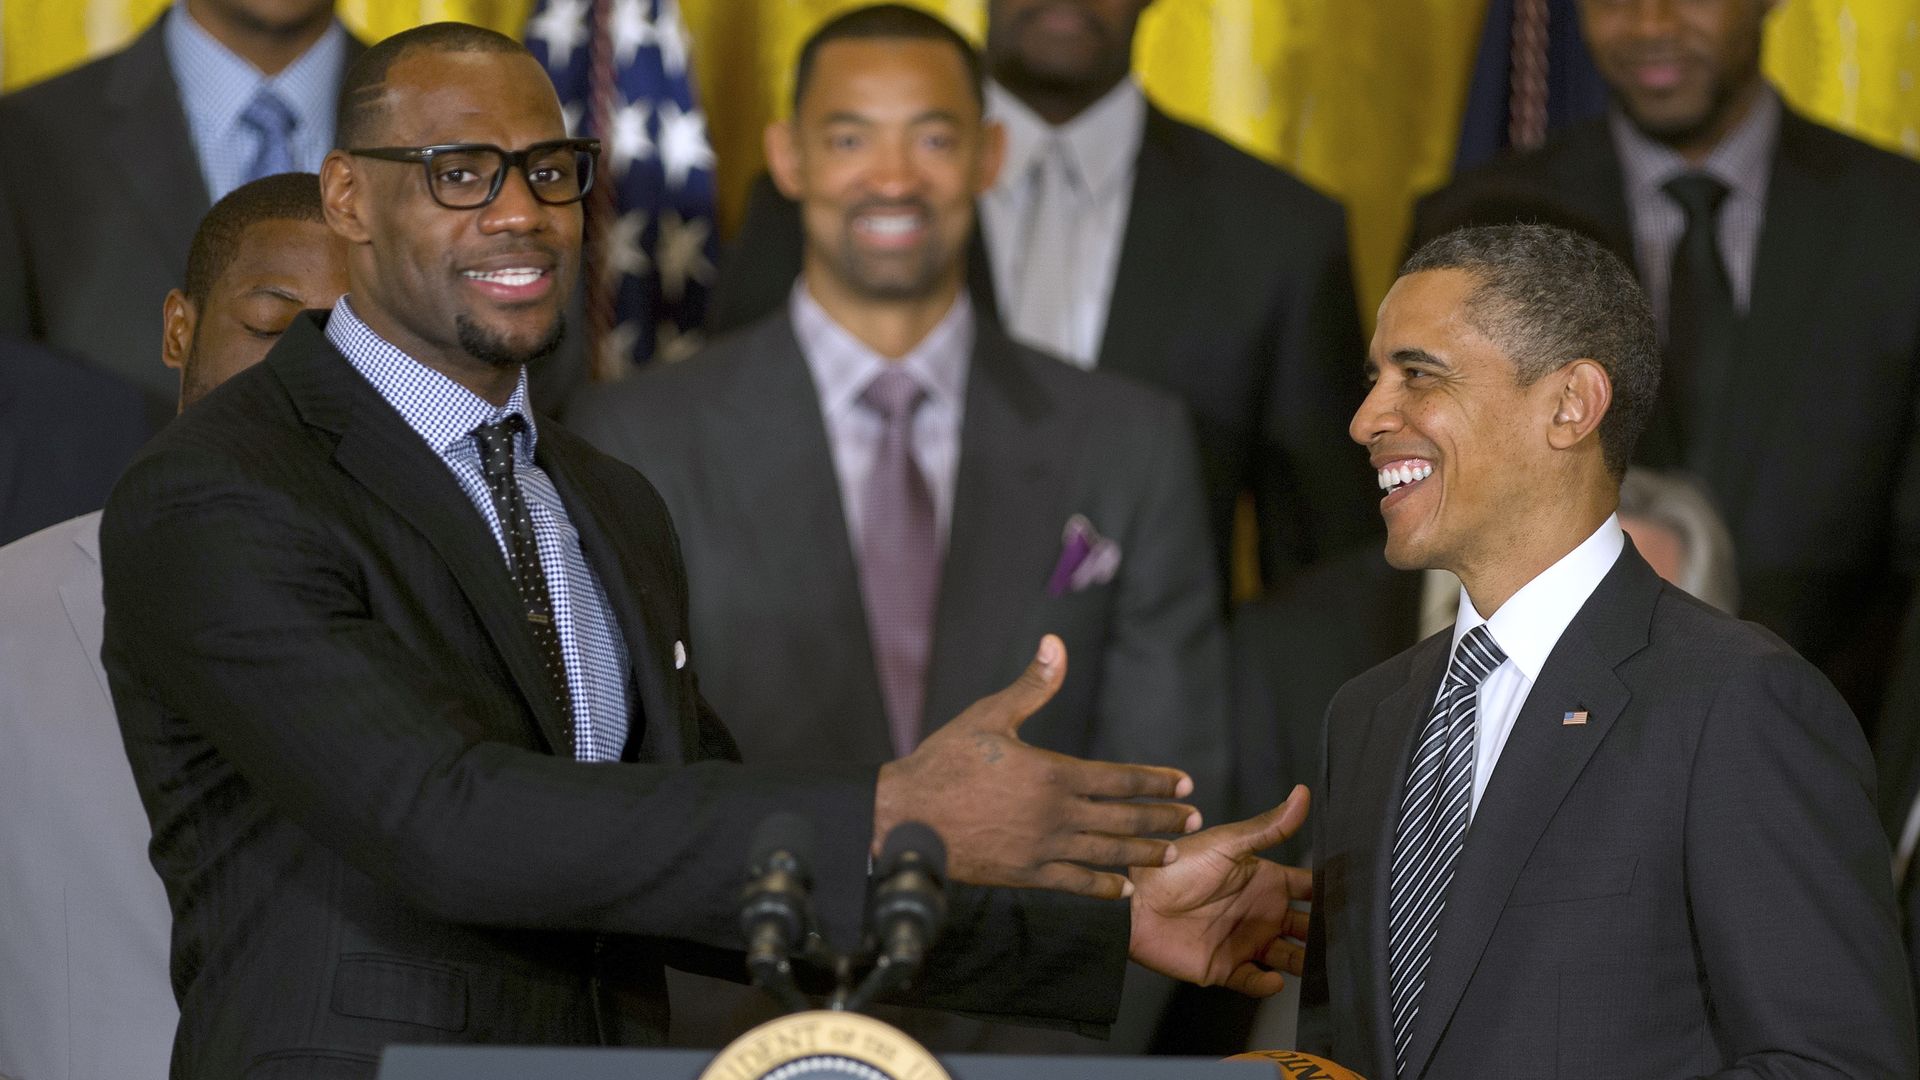 President Barack Obama (R) poses with LeBron James as he welcomes the NBA Champion Miami Heat to the White House to honor the team in 2013